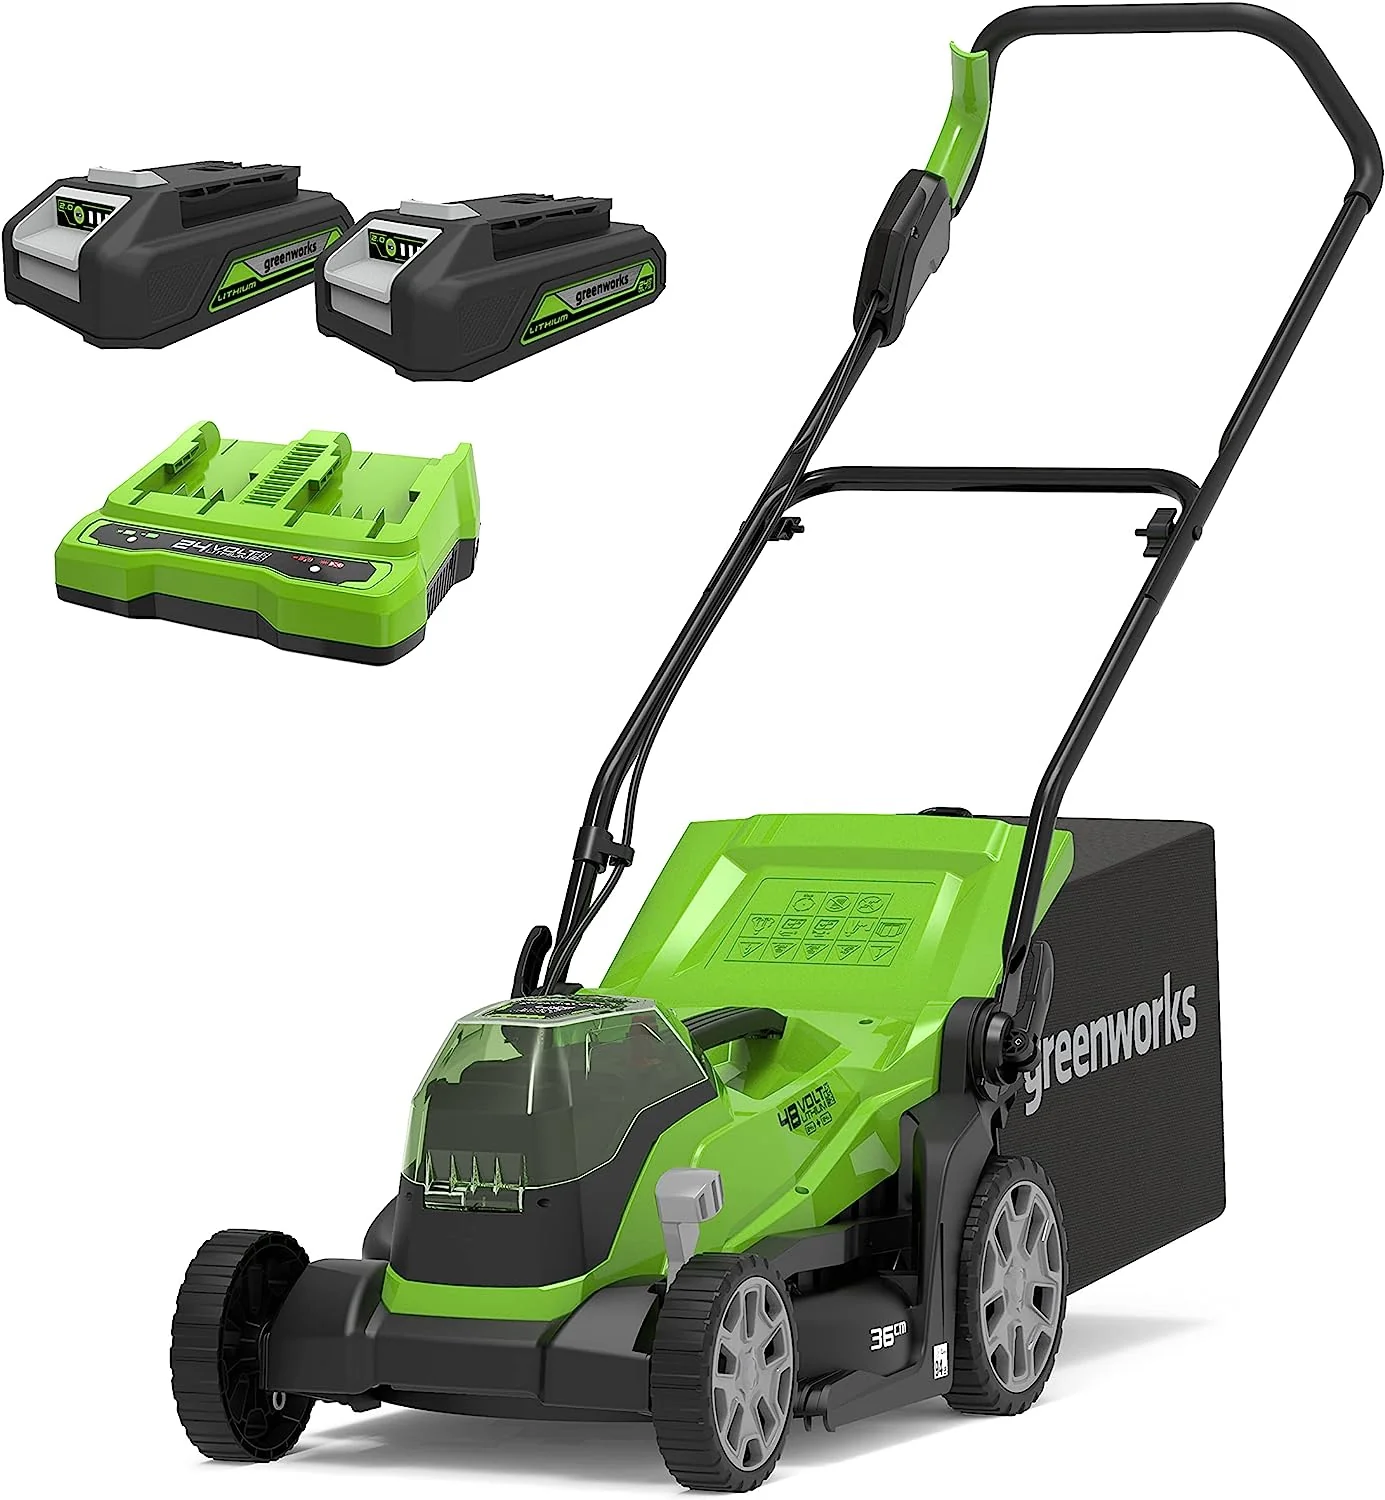 Greenworks 40V Cordless Lawnmower for Lawns up to 500m², 41cm Cutting Width, 50L Bag, Two of 40V 2Ah Batteries & One Charger, 3 Year Guarantee-G40LM41K2X